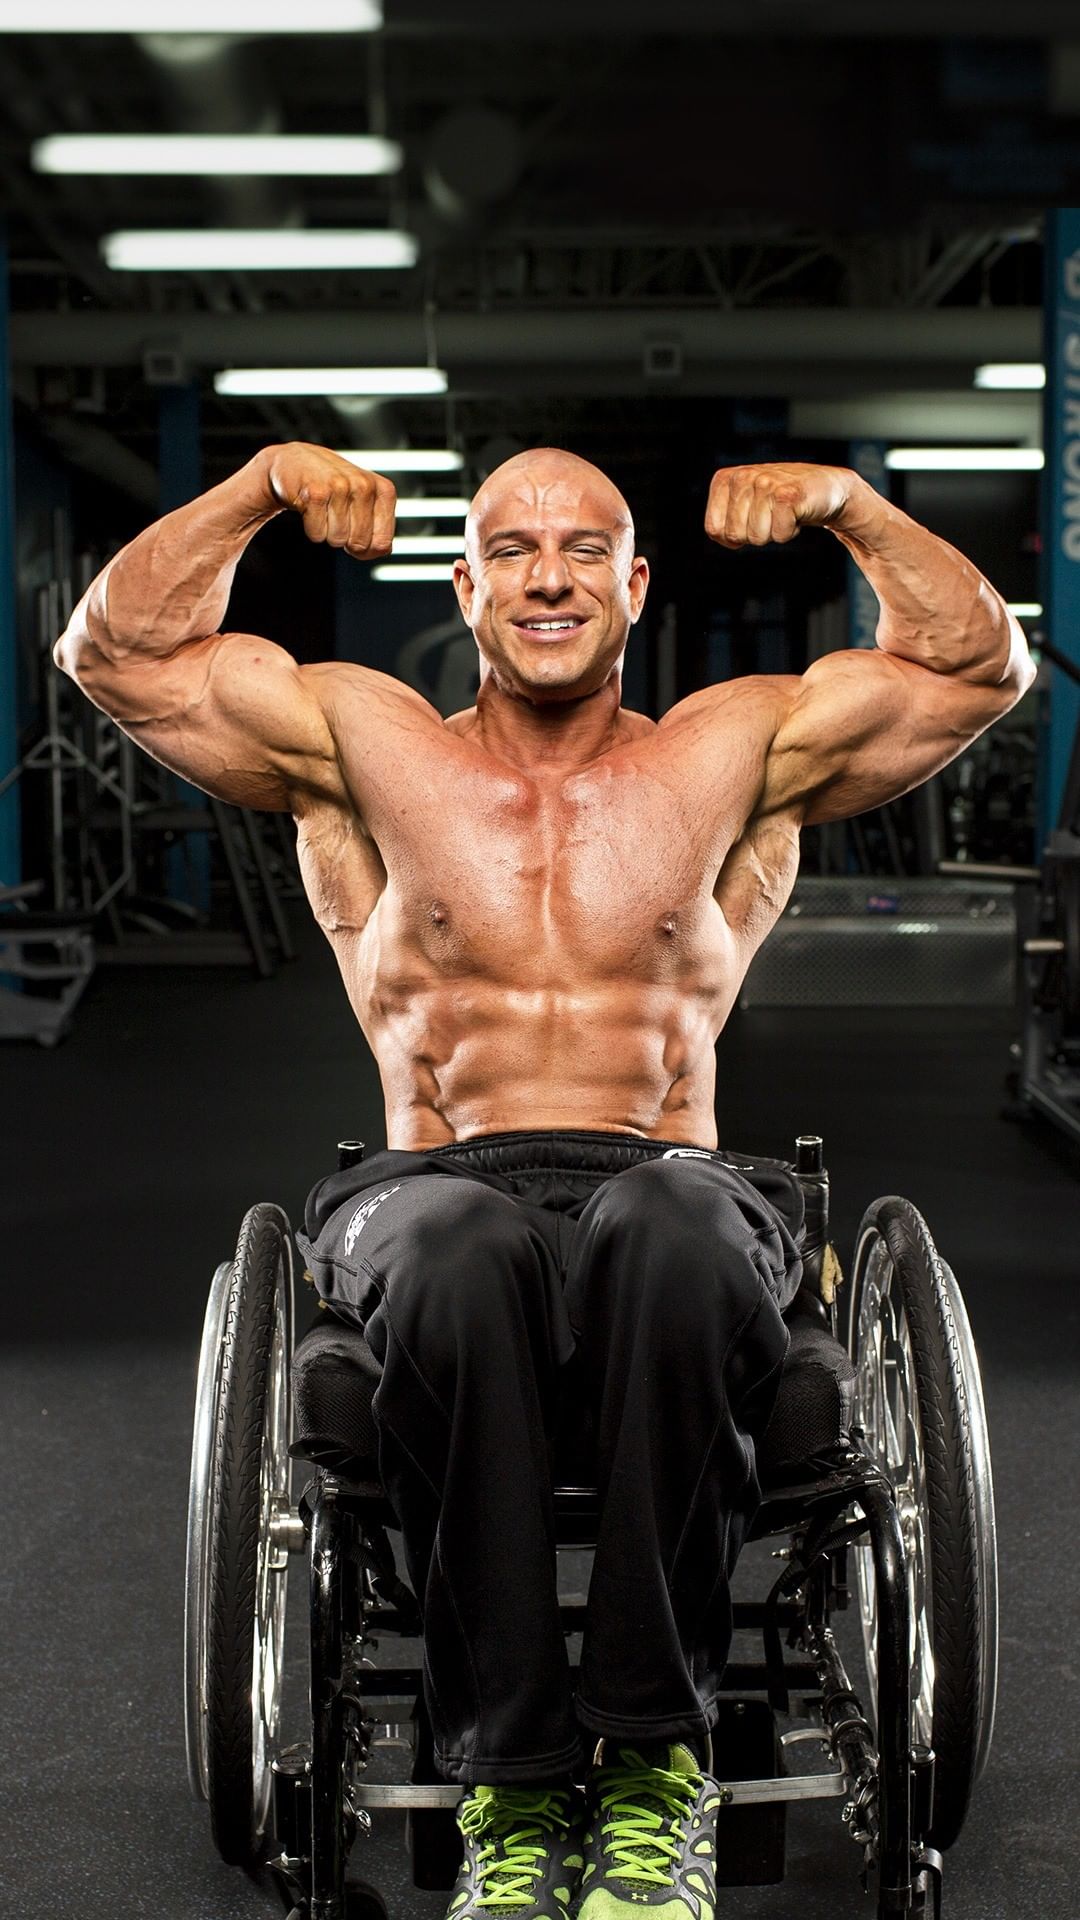 Bodybuilding.com - A car accident left Nick Scott unable to walk, but it didn't derail his competitive ambitions. He's become a shining light in wheelchair bodybuilding and an inspiration to lifters e...